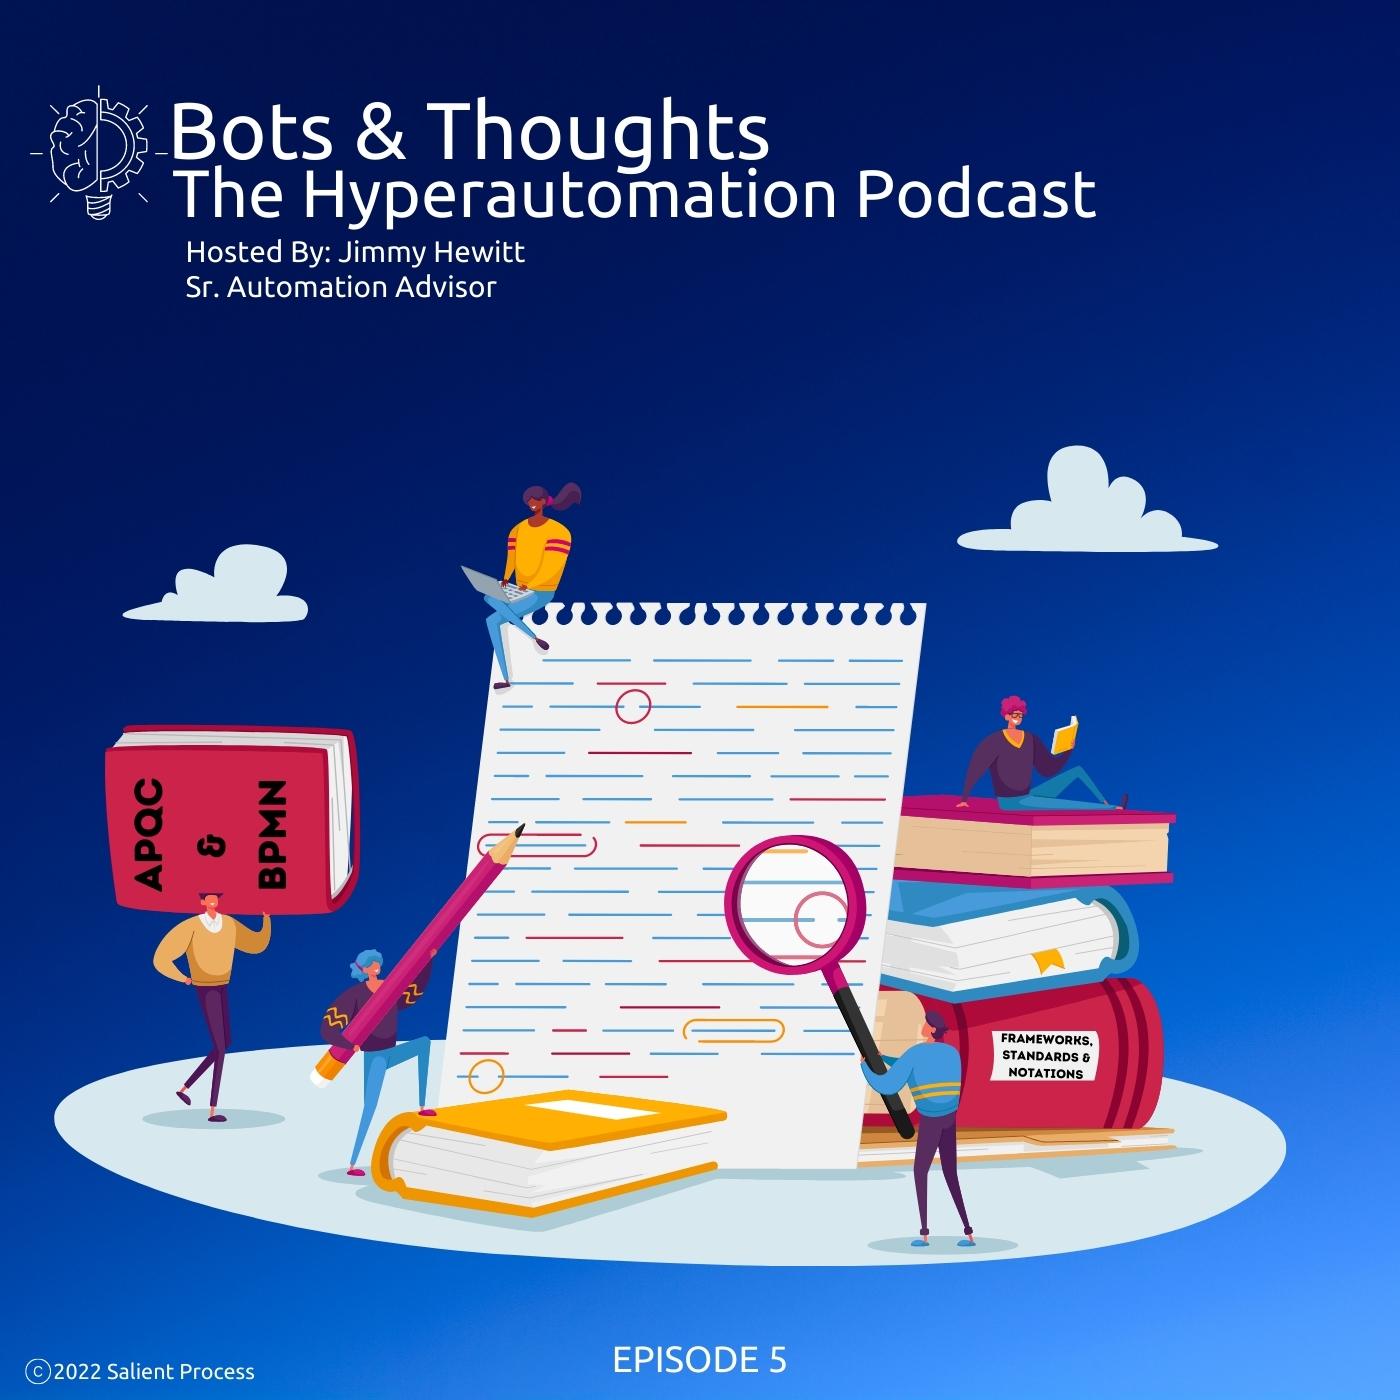 Bots & Thoughts: The Hyperautomation Podcast, Hosted by Jimmy Hewitt (Sr. Automation Advisor) - Episode 5 - Cover Art